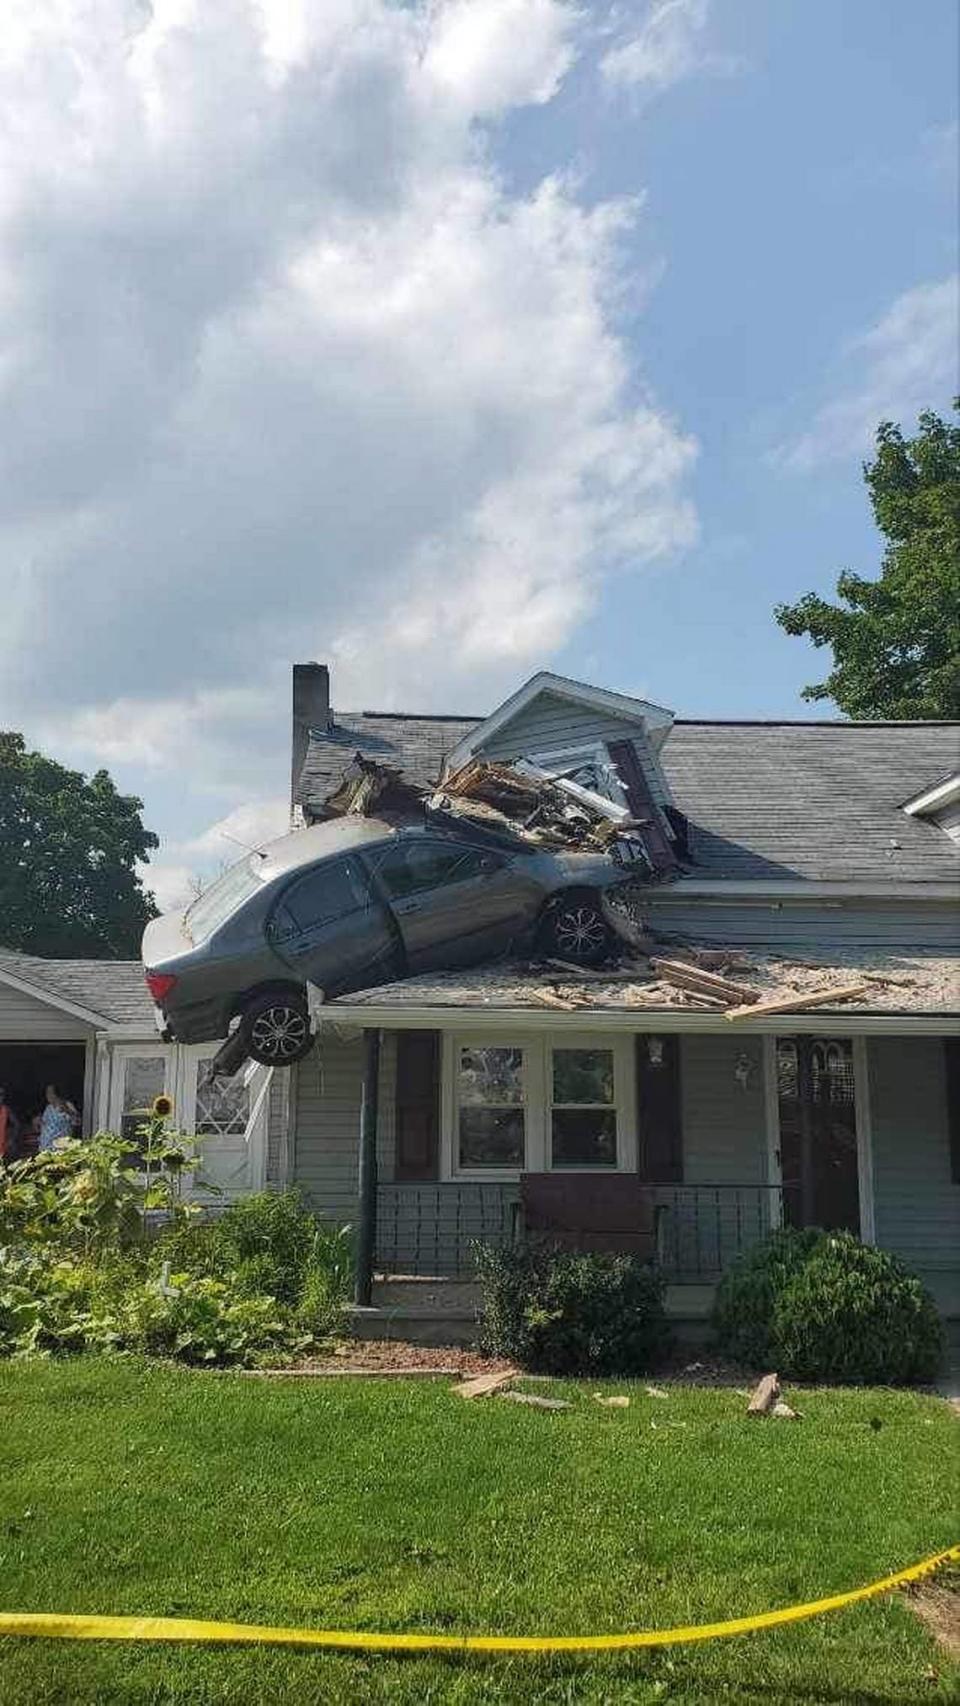 The rescuers removed the car and helped stabilize the home, officials said.